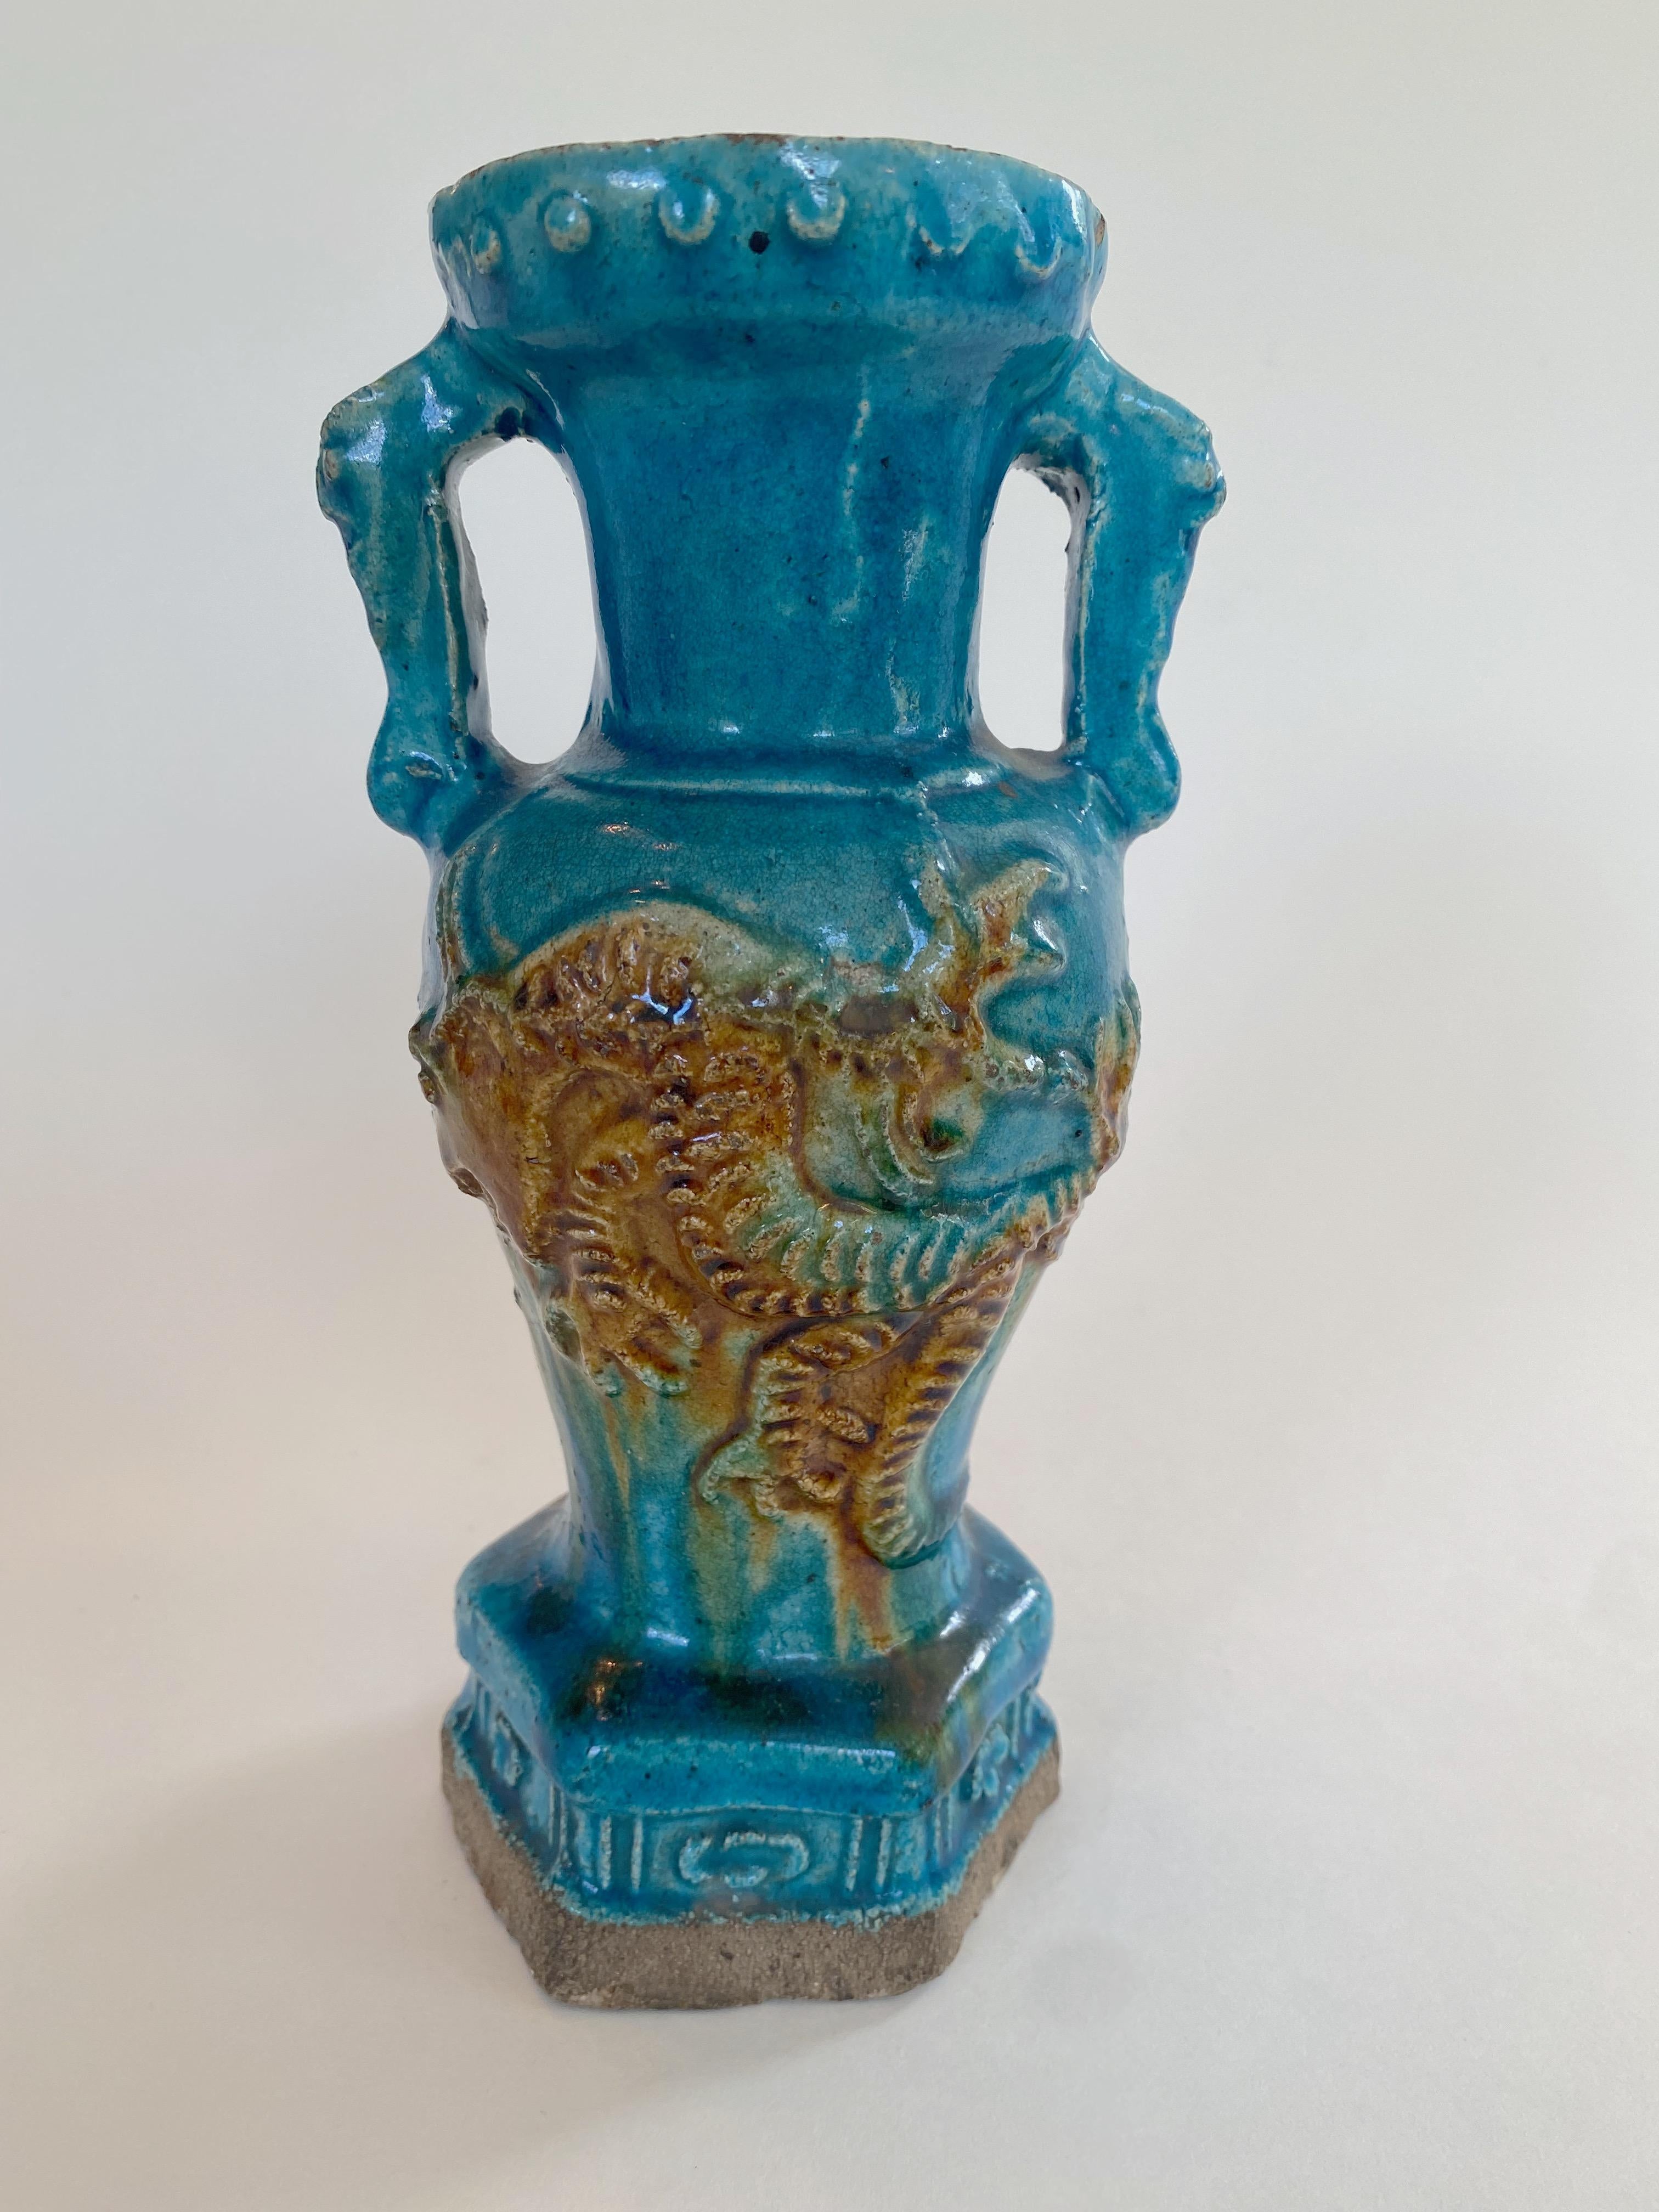 Ming Dynasty Vase with Vibrant Turquoise Glaze In Good Condition For Sale In Atlanta, GA